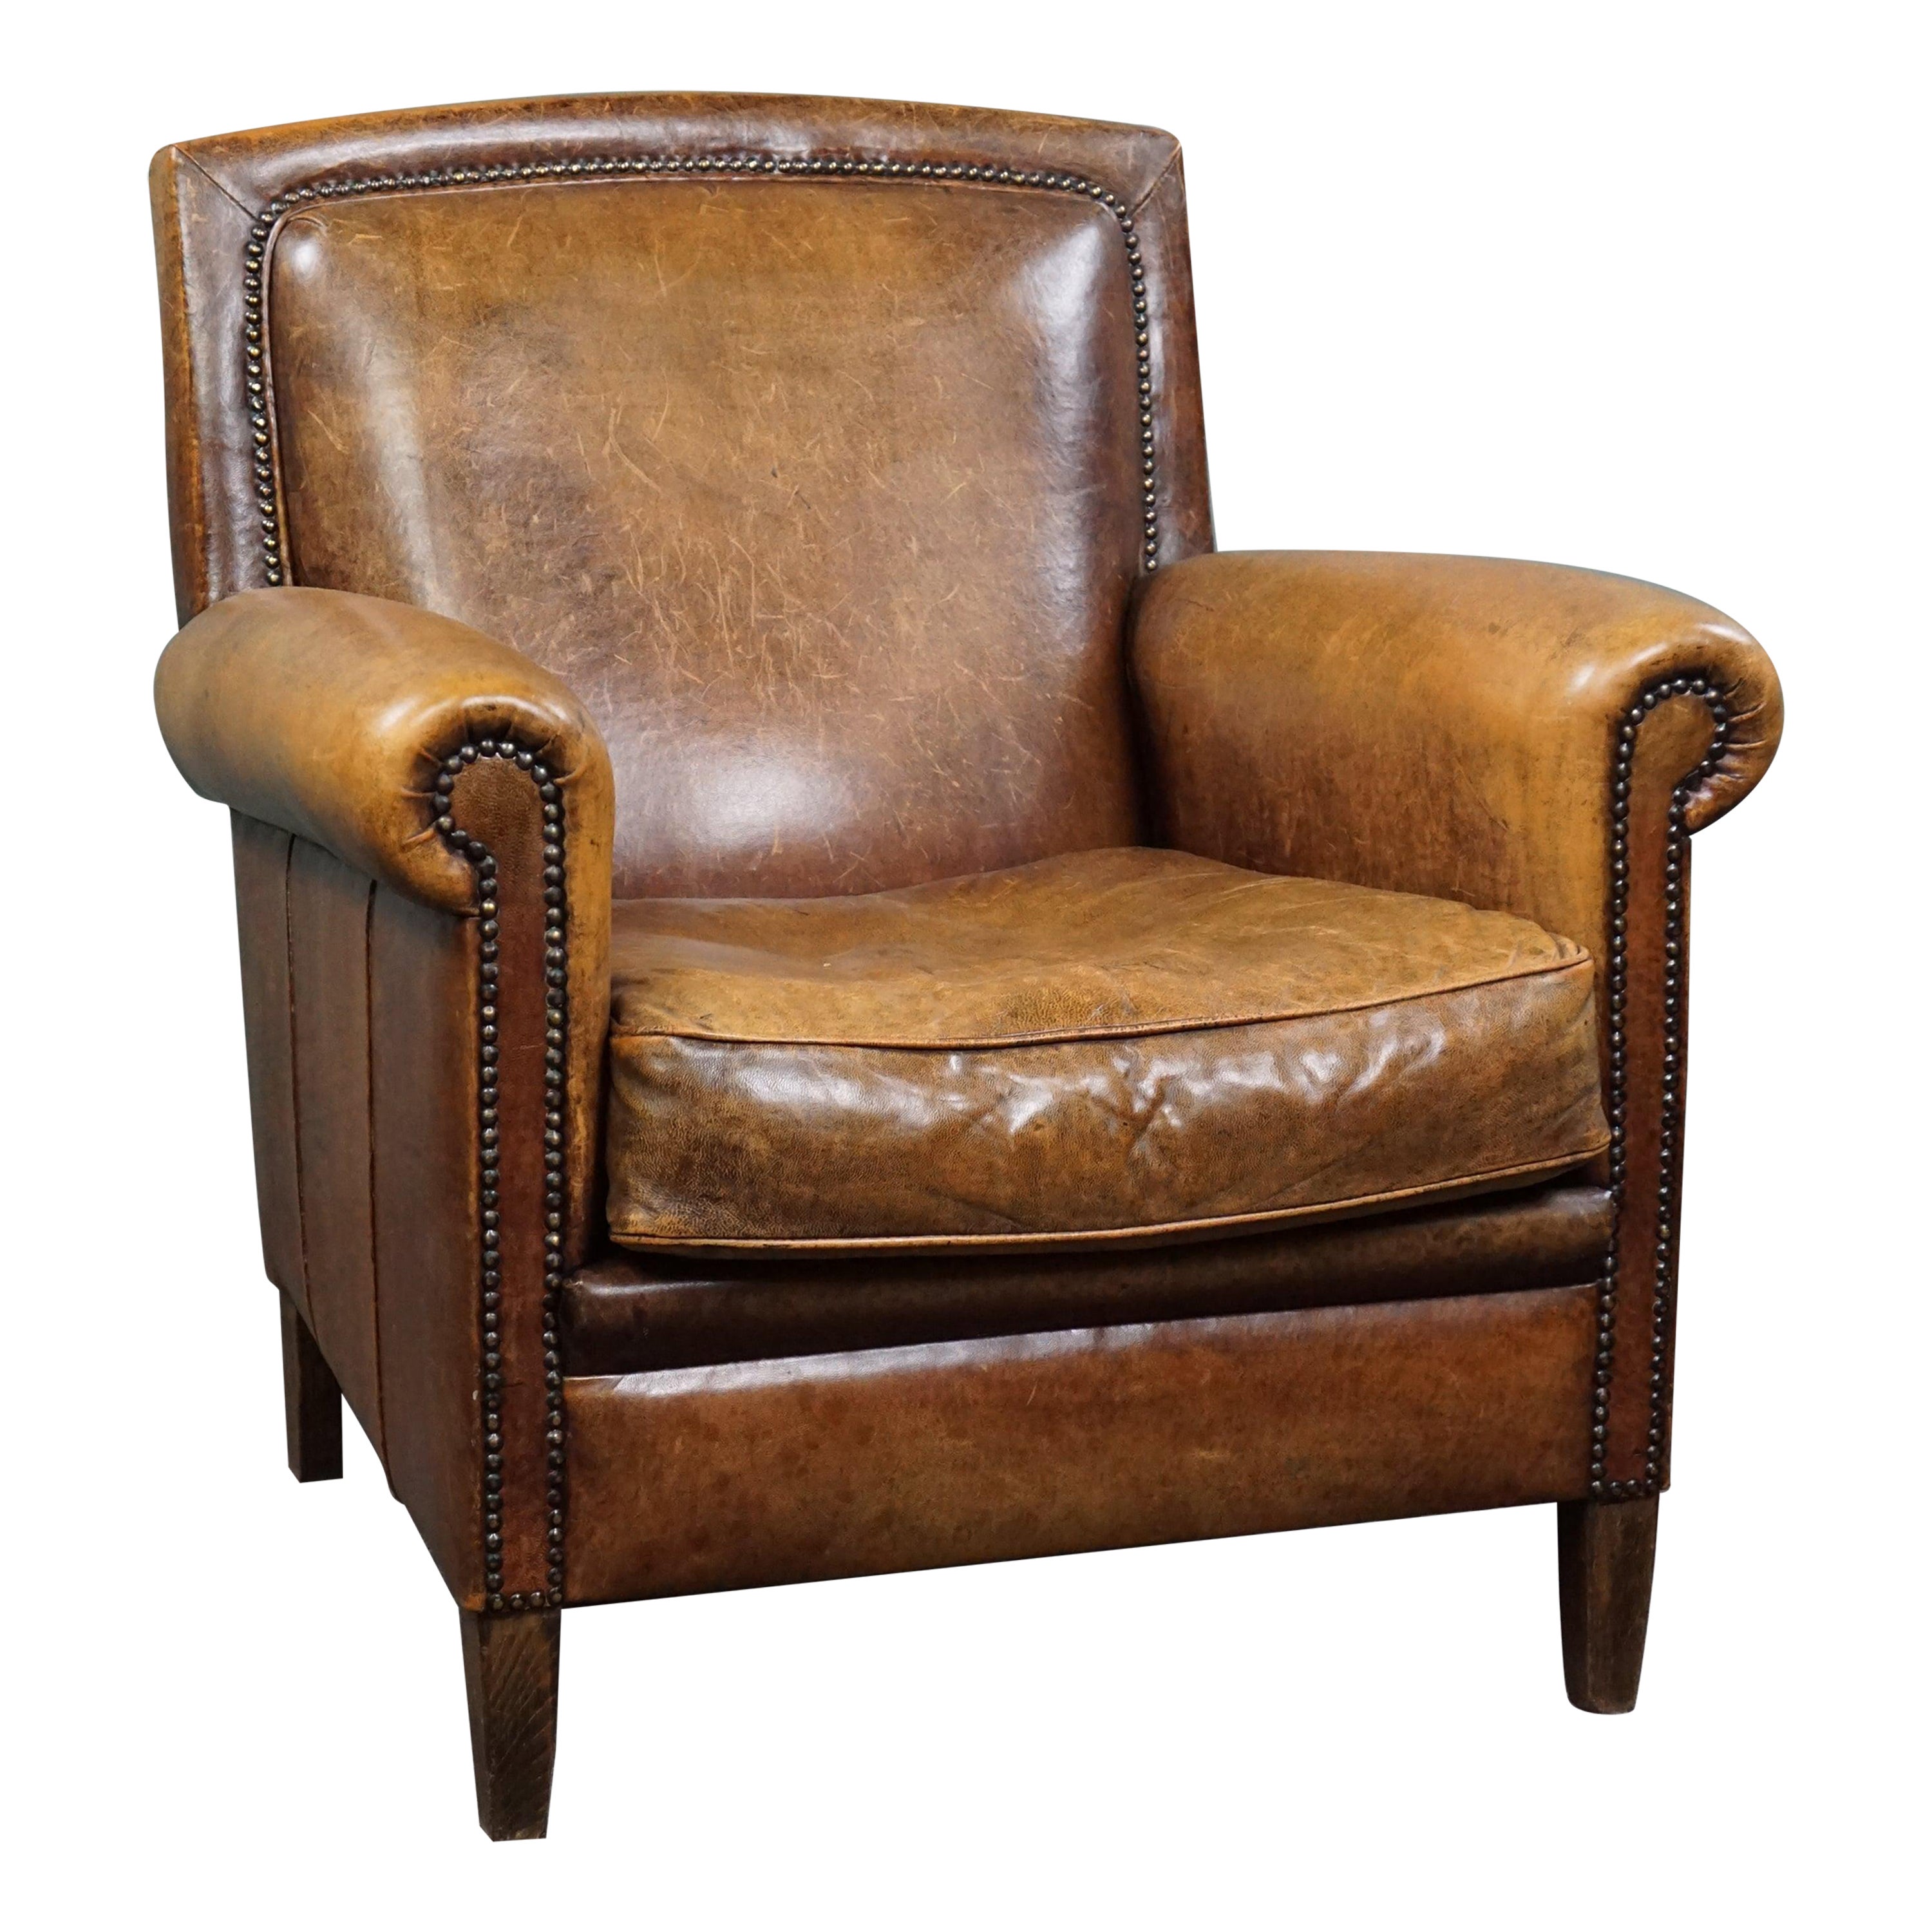 Well-fitting Sheepskin Leather Armchair/Fauteuil.